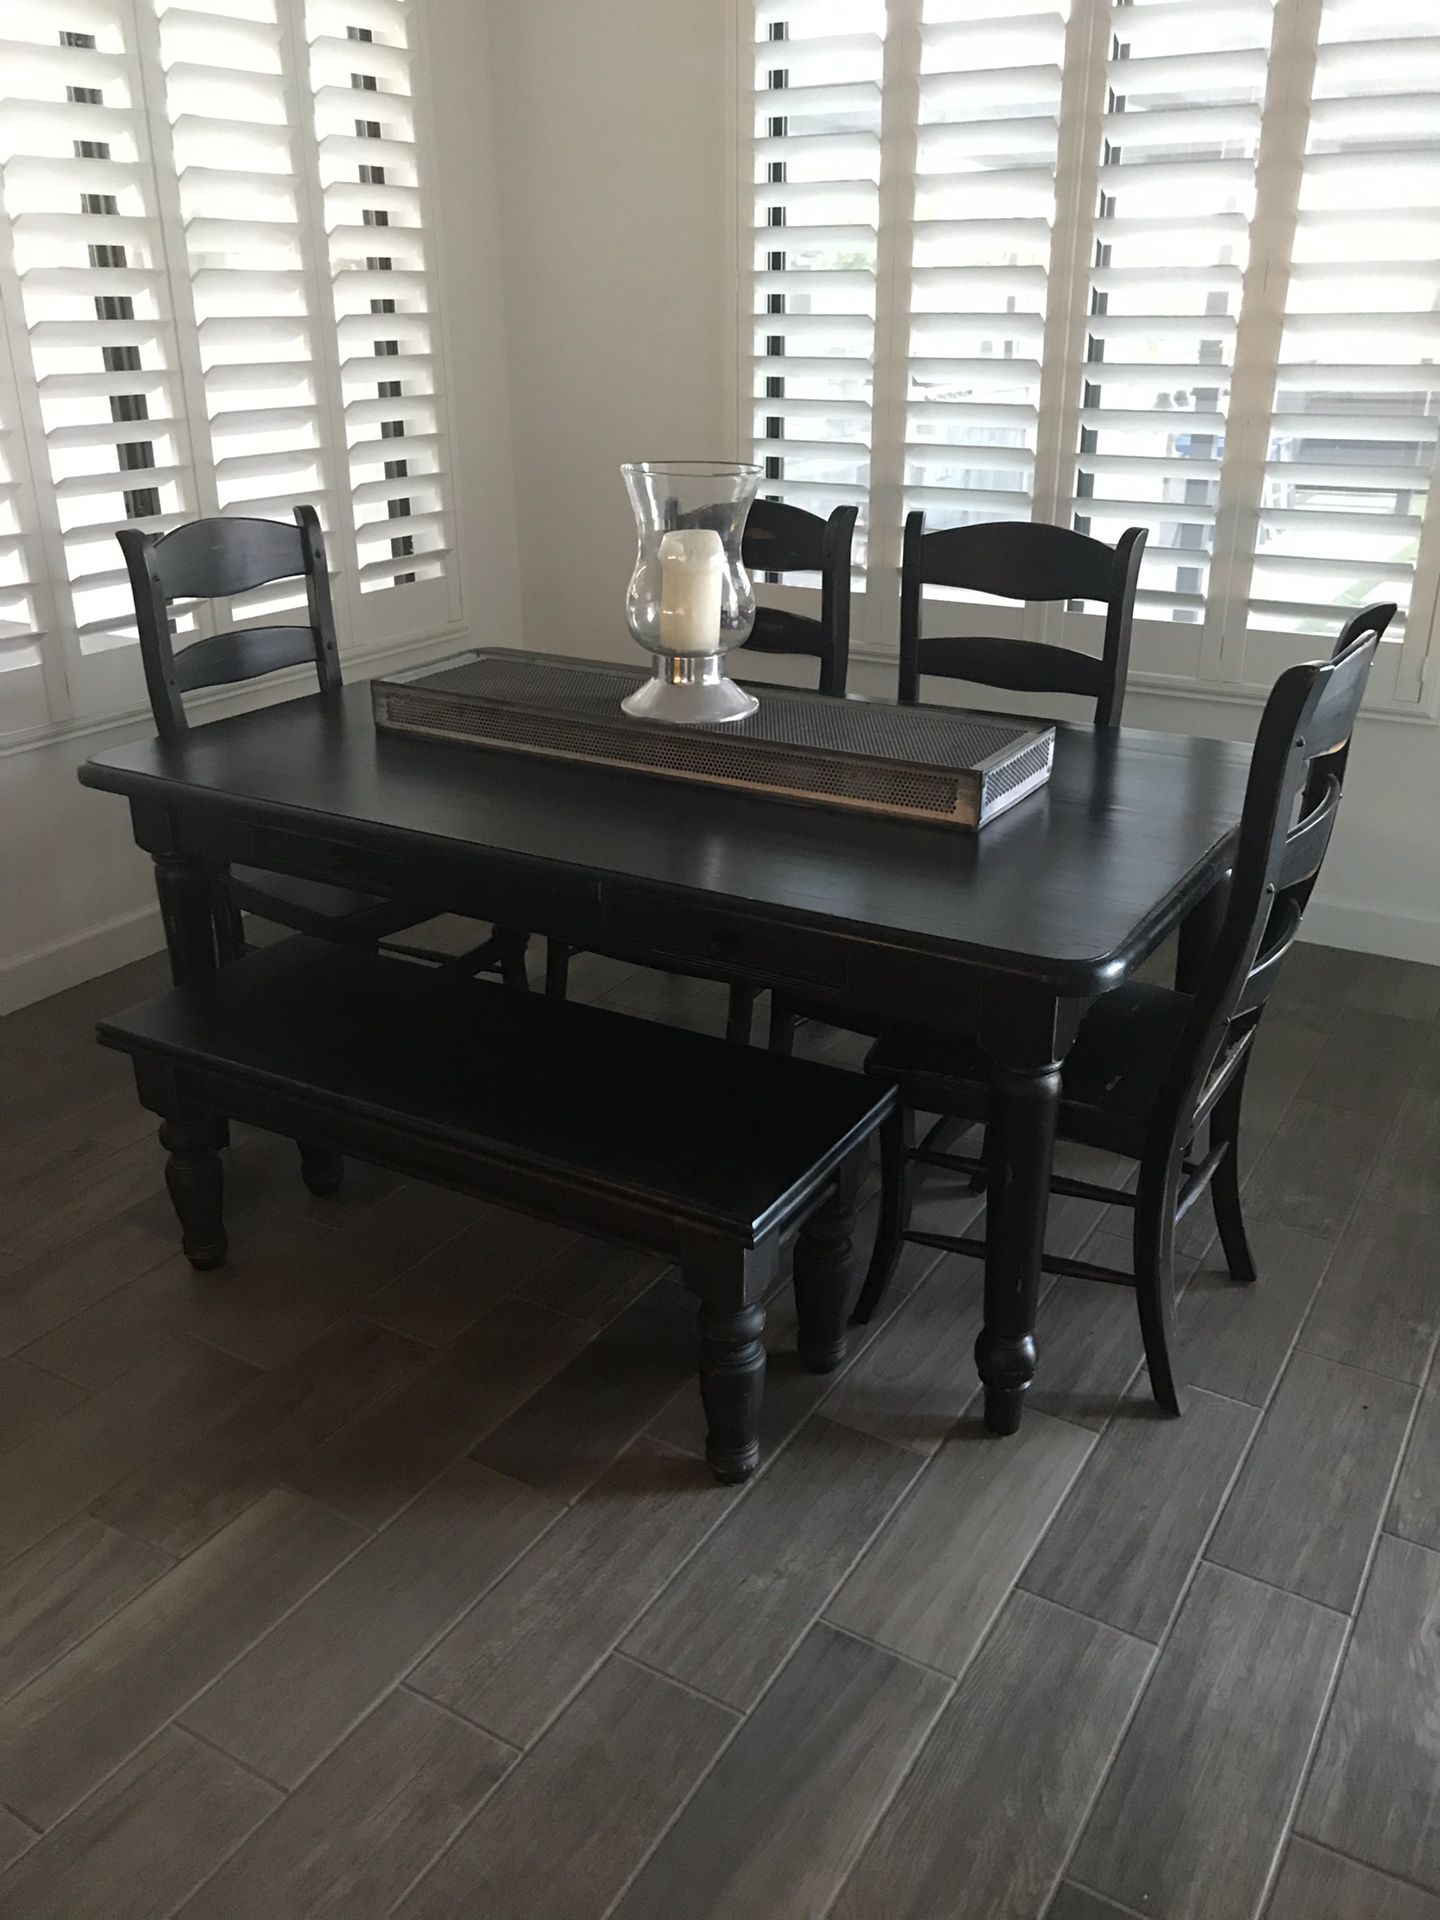 Kitchen table with bench and 4 chairs